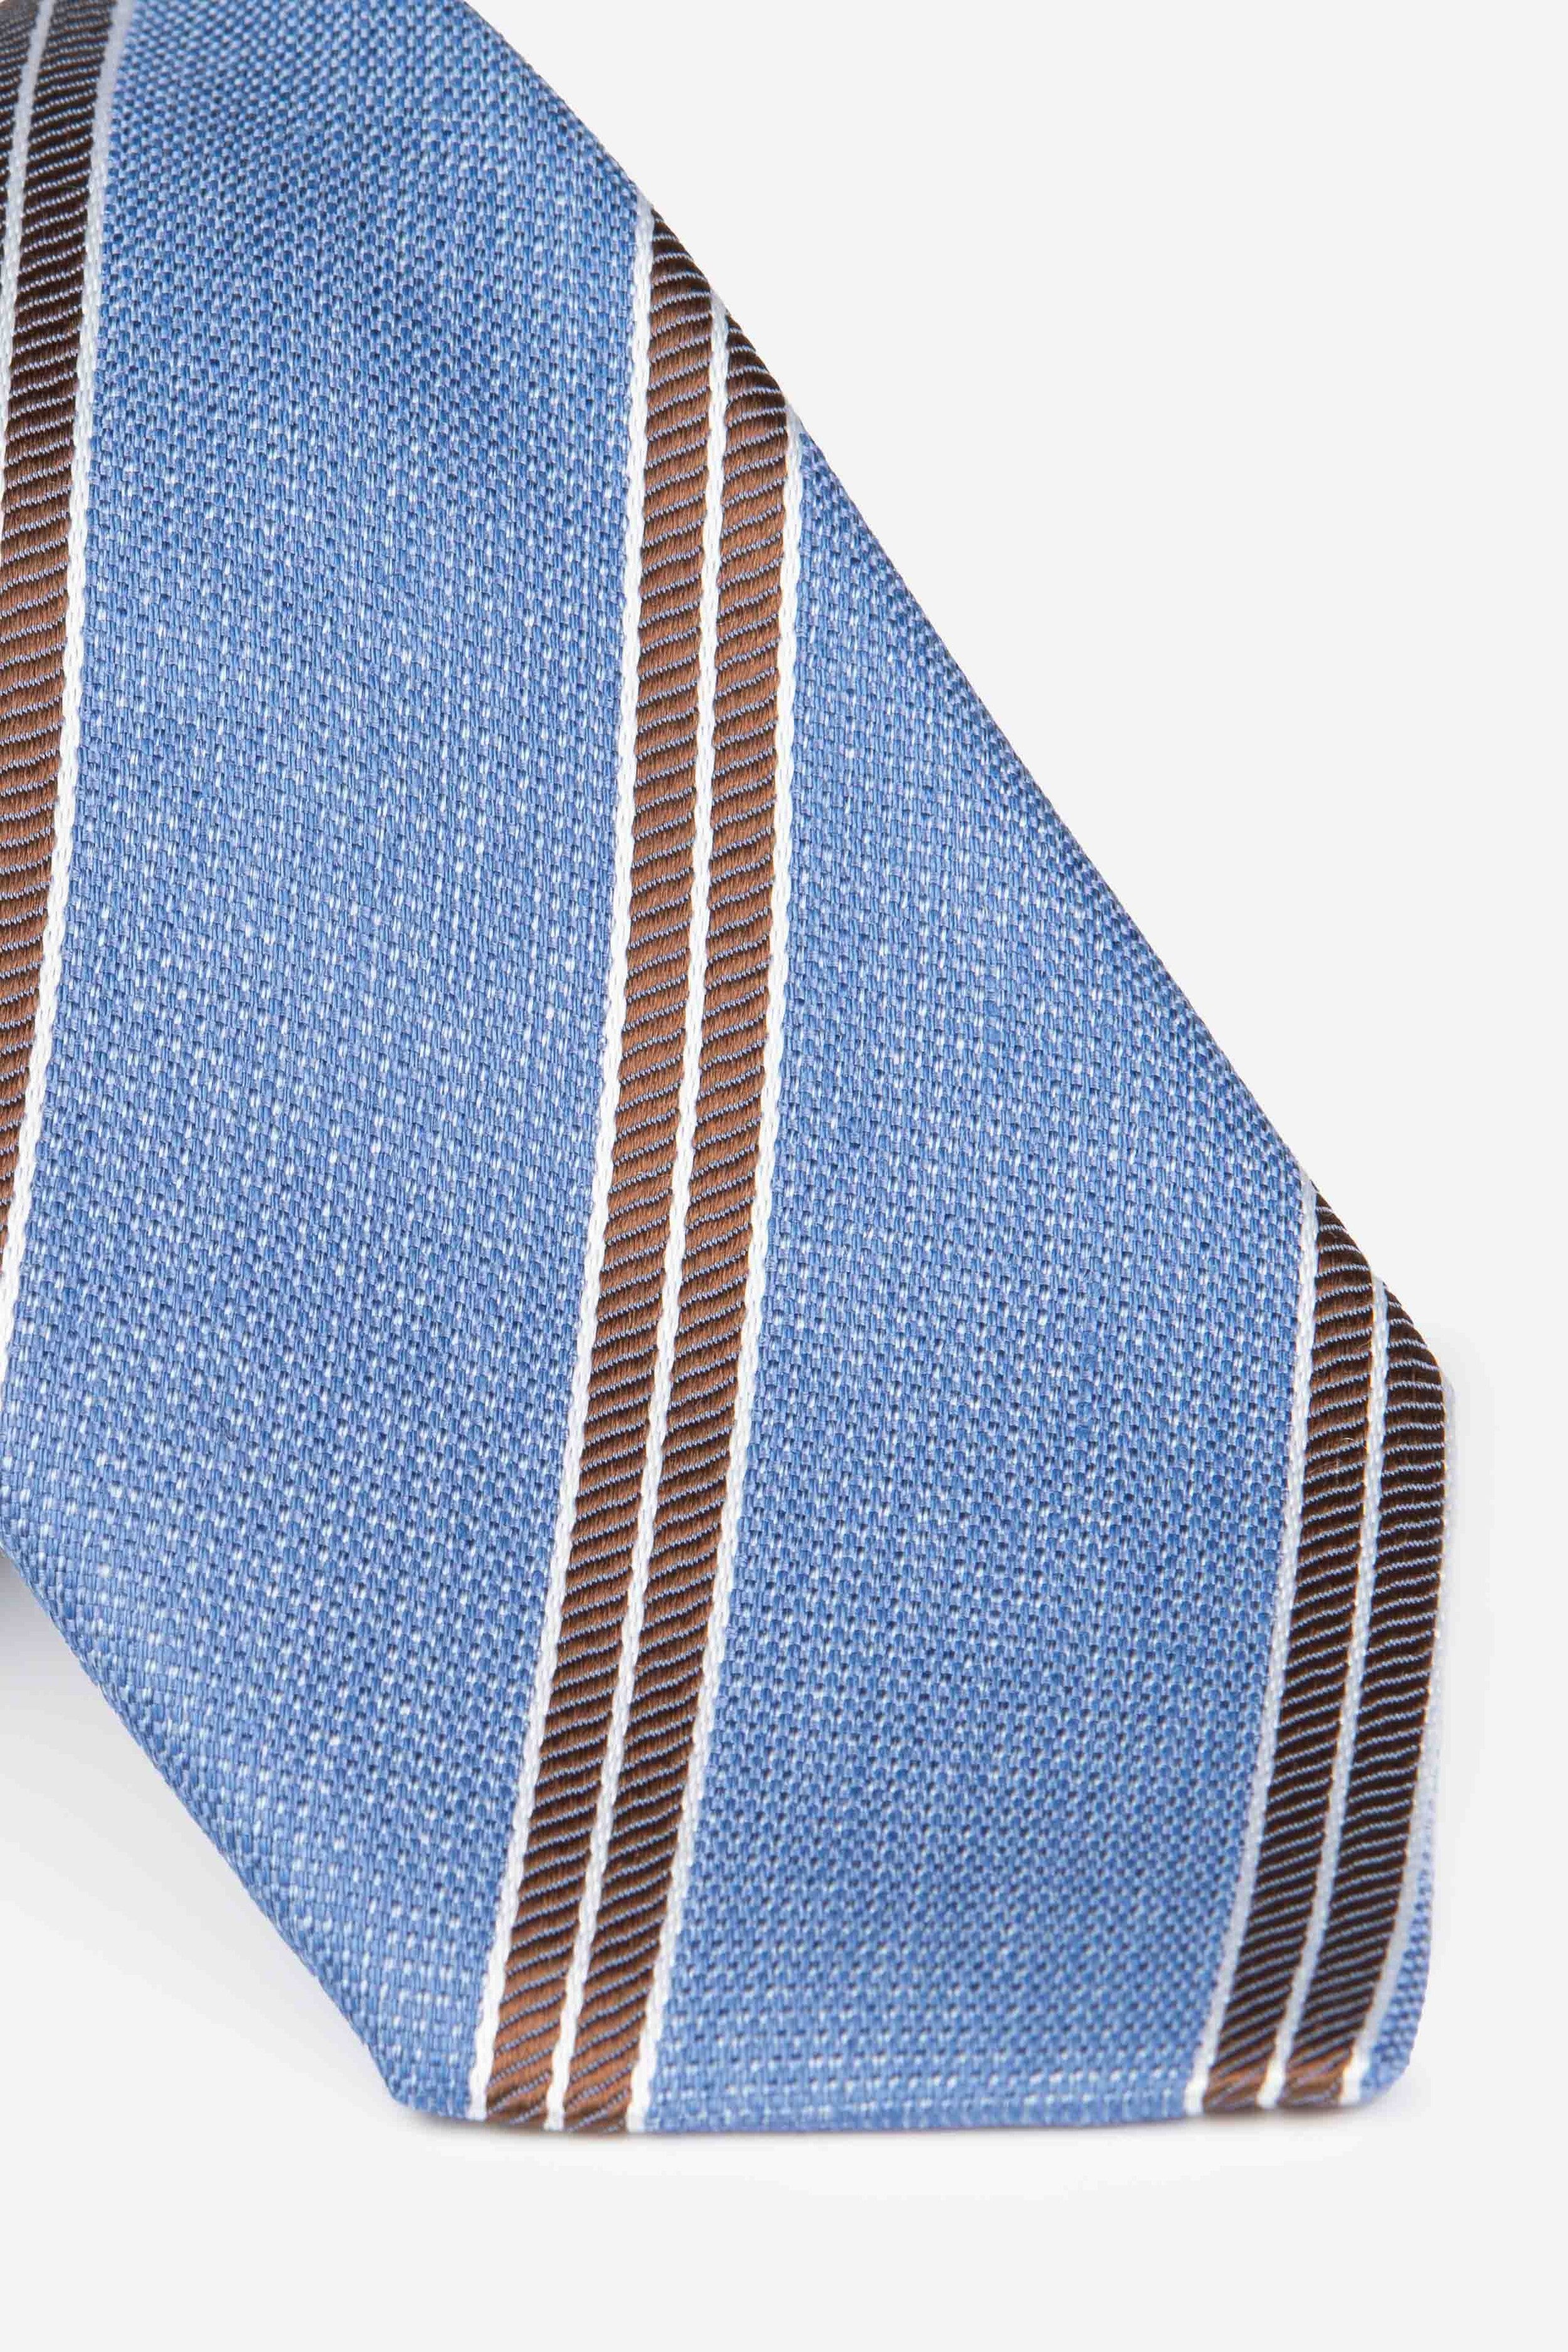 Striped patterned tie - Light blue-Brown